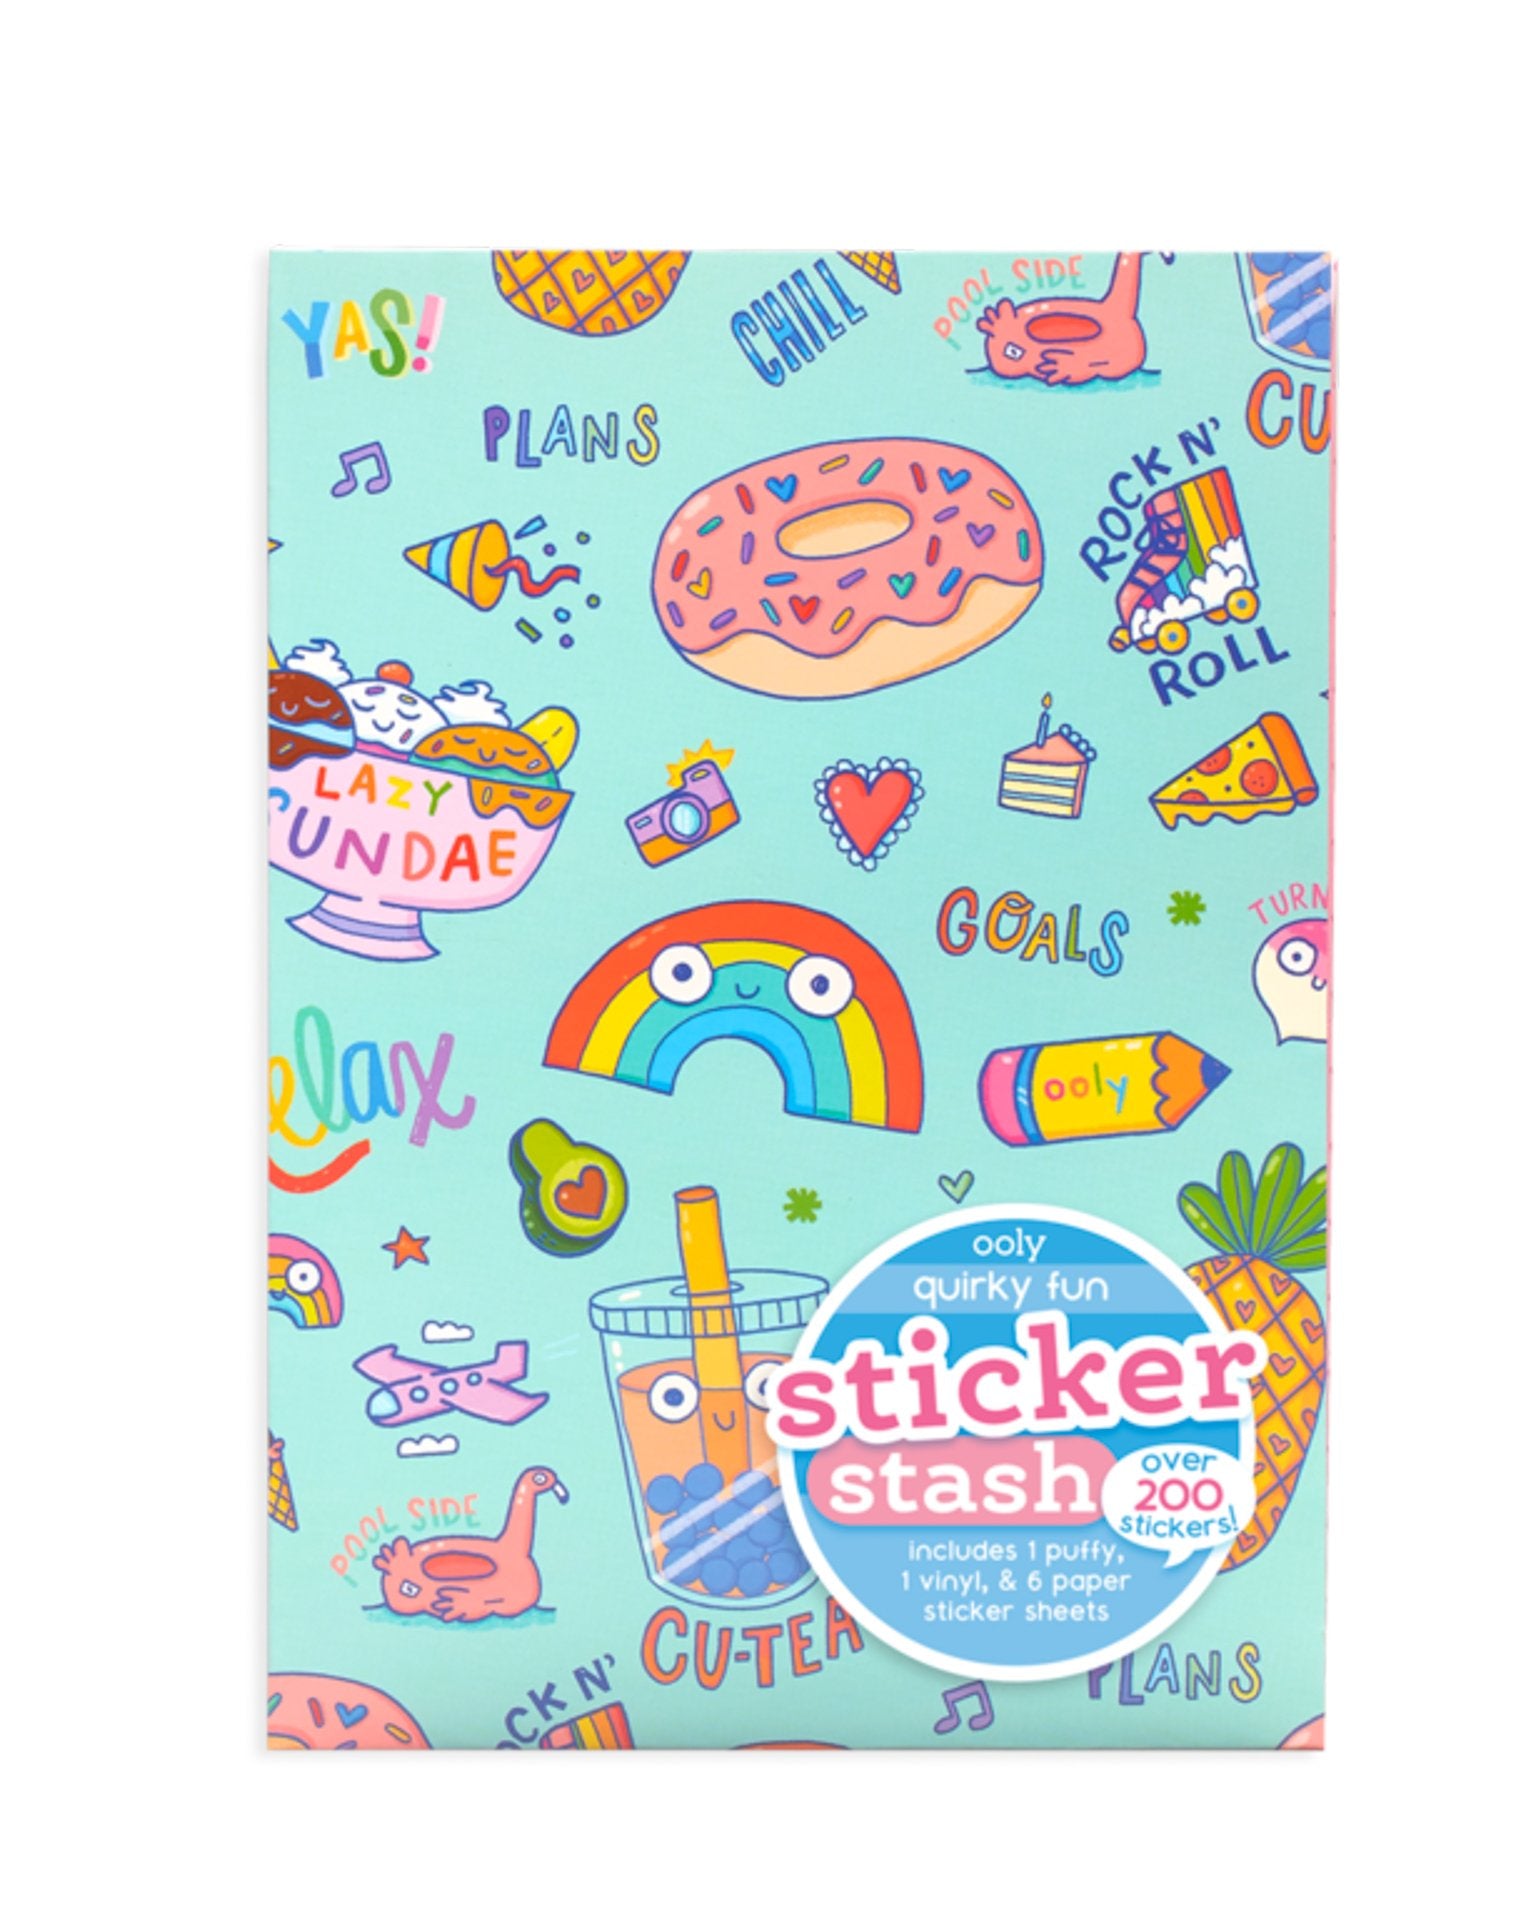 Little ooly play quirky fun sticker stash